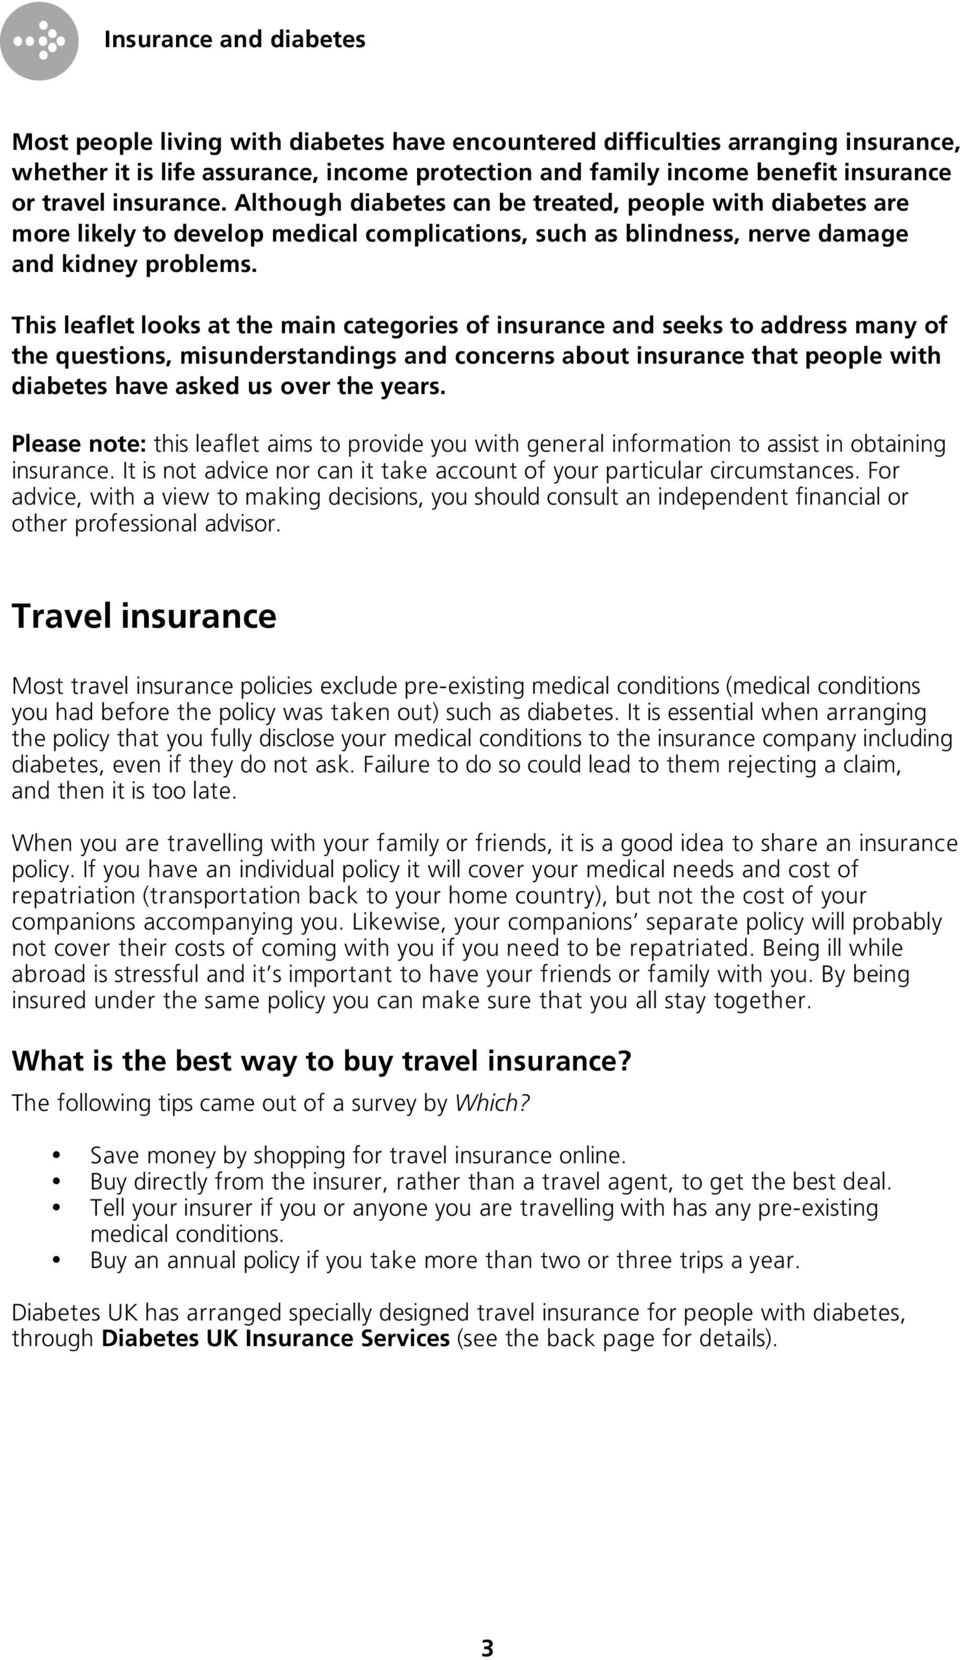 This leaflet looks at the main categories of insurance and seeks to address many of the questions, misunderstandings and concerns about insurance that people with diabetes have asked us over the